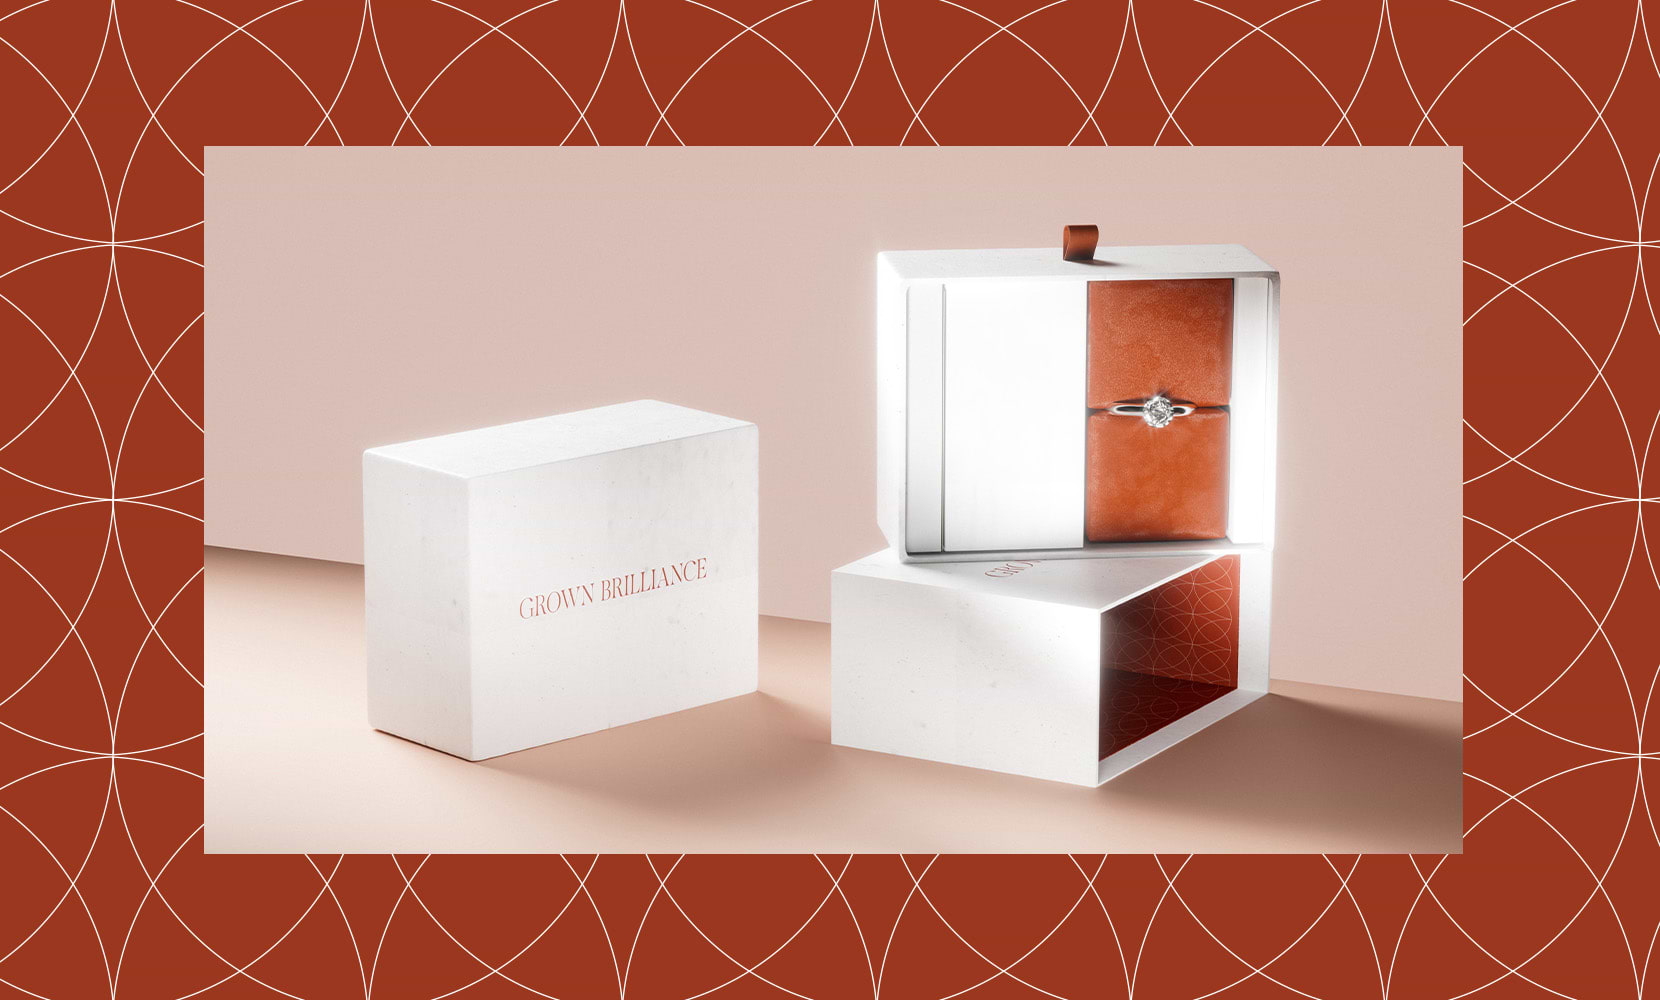 Image of Grown Brilliance's jewelry boxes with the brand's pattern as an outline